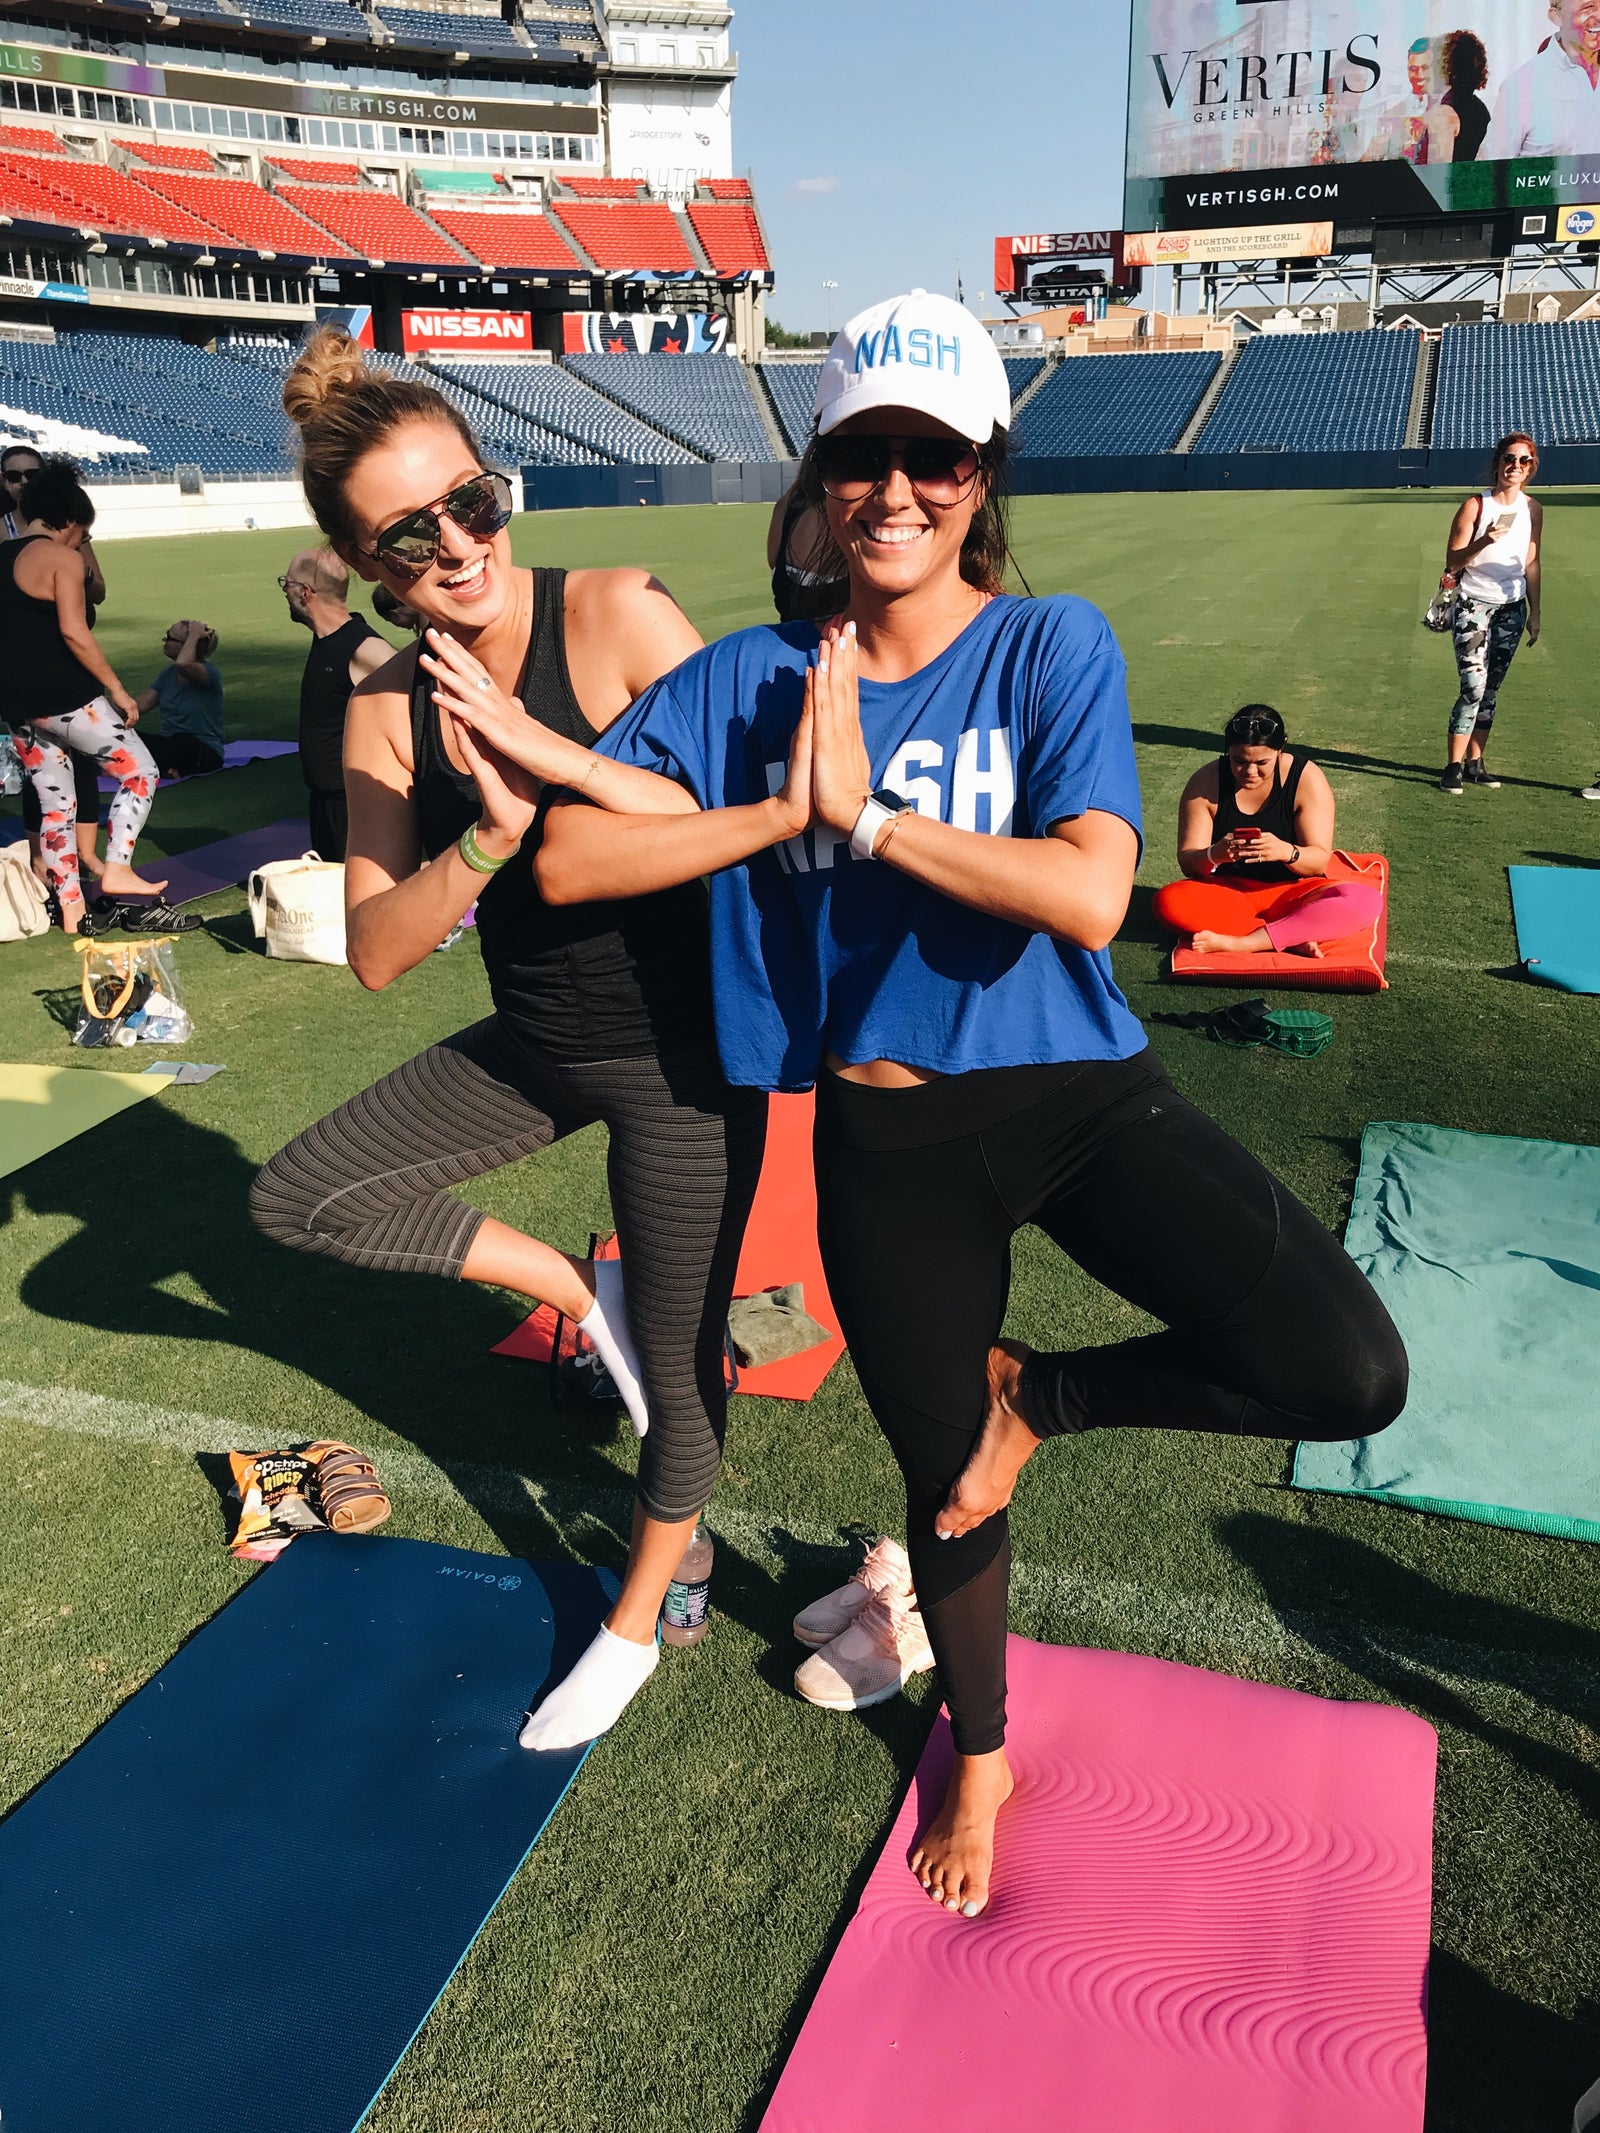 YOGA ON THE FIELD